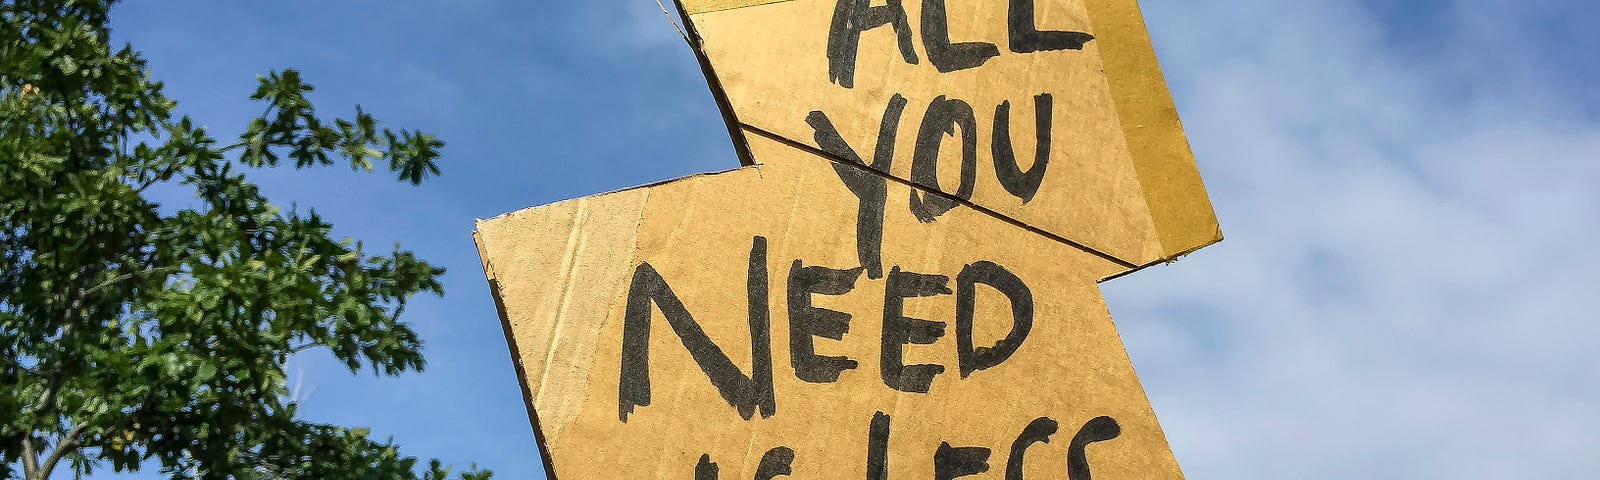 Sign on cardboard reading ‘all you need is less’.